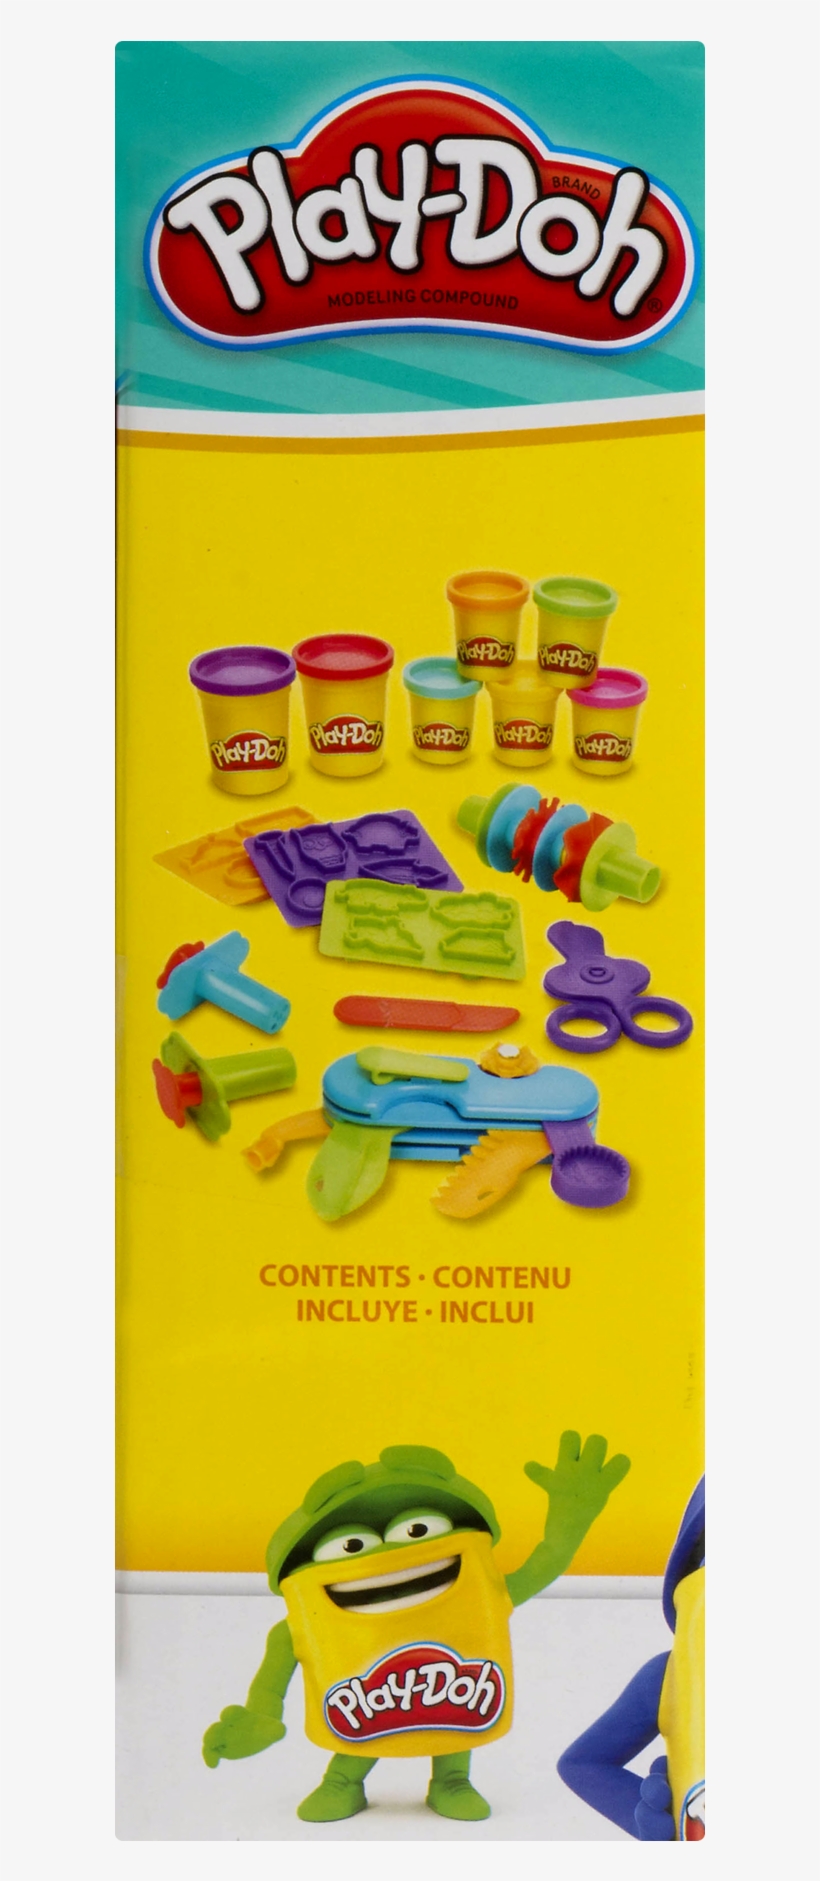 Play-doh - Play-doh Backpack Travel Kit, transparent png #1367423